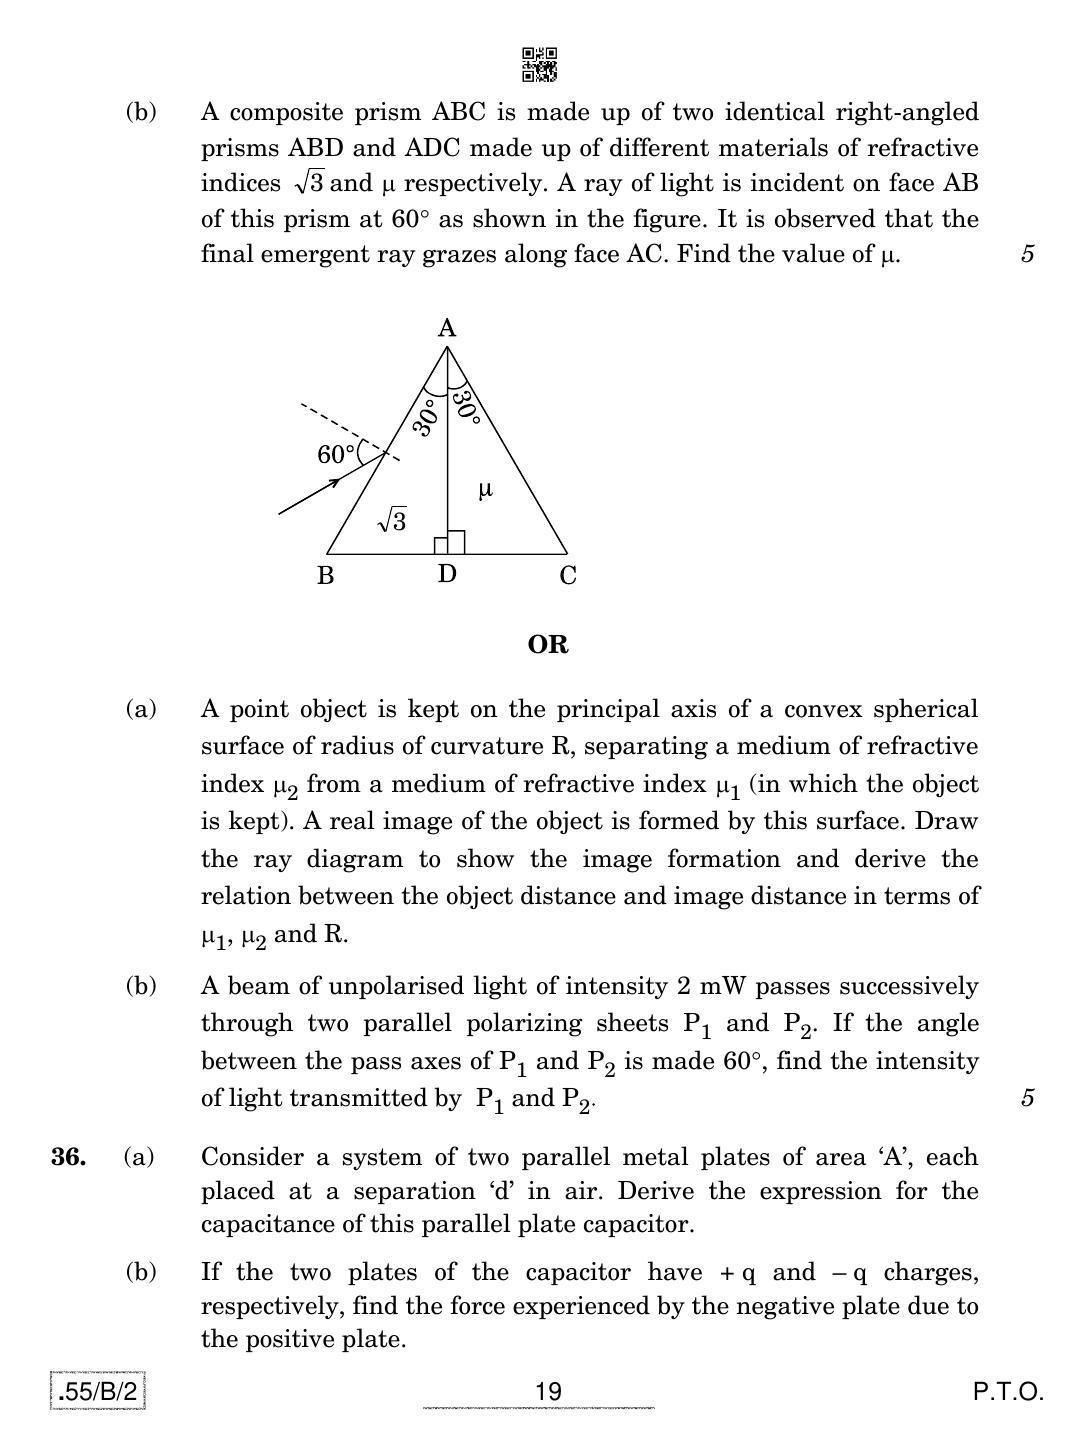 CBSE Class 12 55-C-2 - Physics 2020 Compartment Question Paper - Page 19